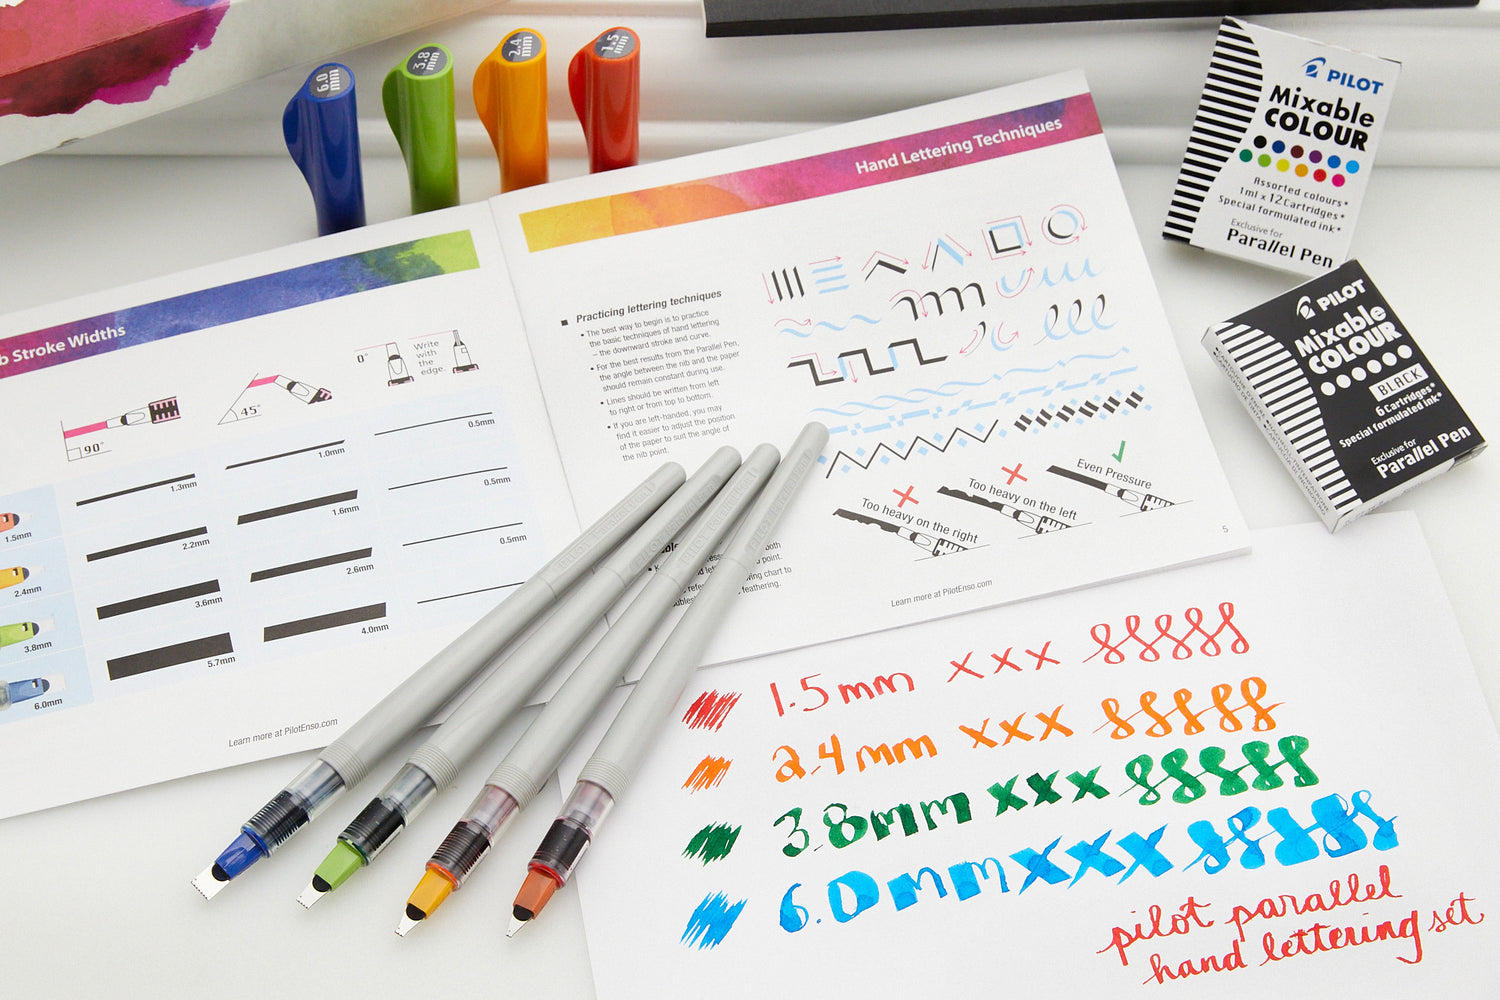 A guide to Pilot's Lettering & Drawing pens